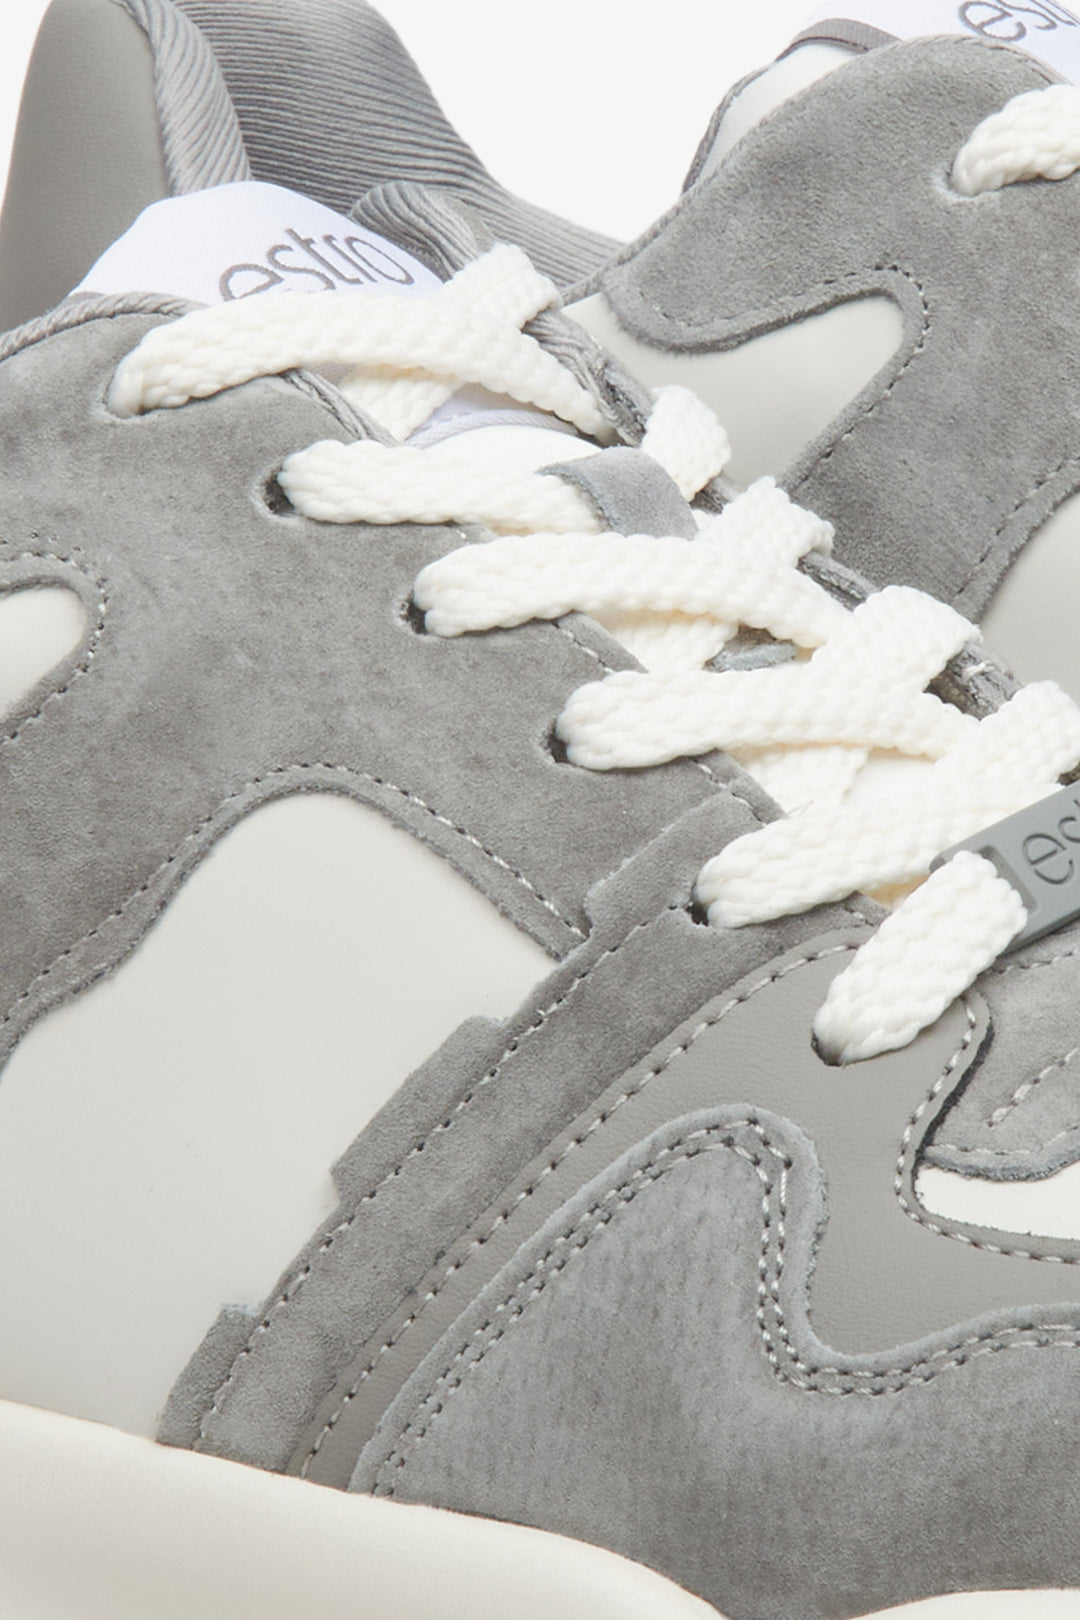 Women's grey and white sneakers - close-up on details.